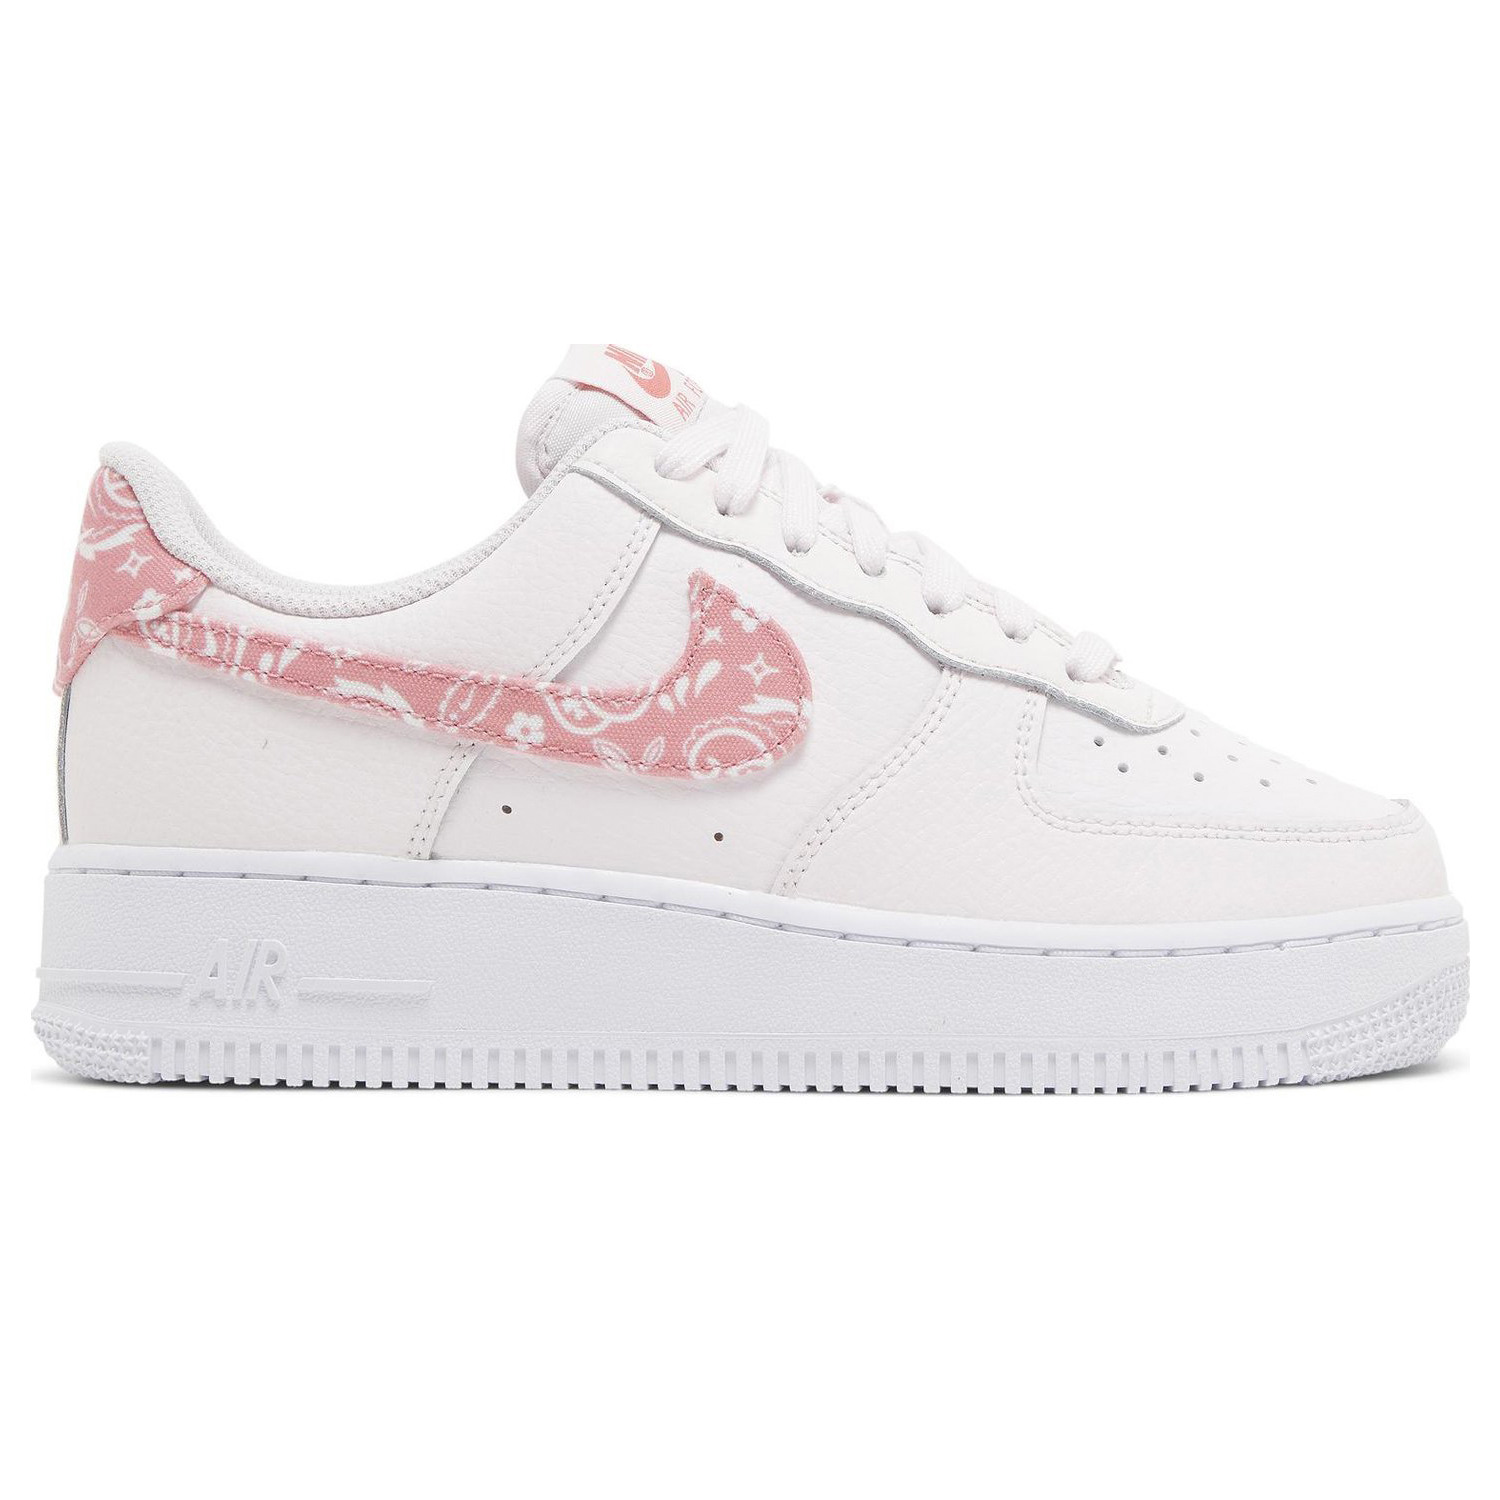 Кроссовки Nike Wmns Air Force 1 '07 'Pink Paisley', Розовый кроссовки nike wmns air force 1 mid 07 leather белый